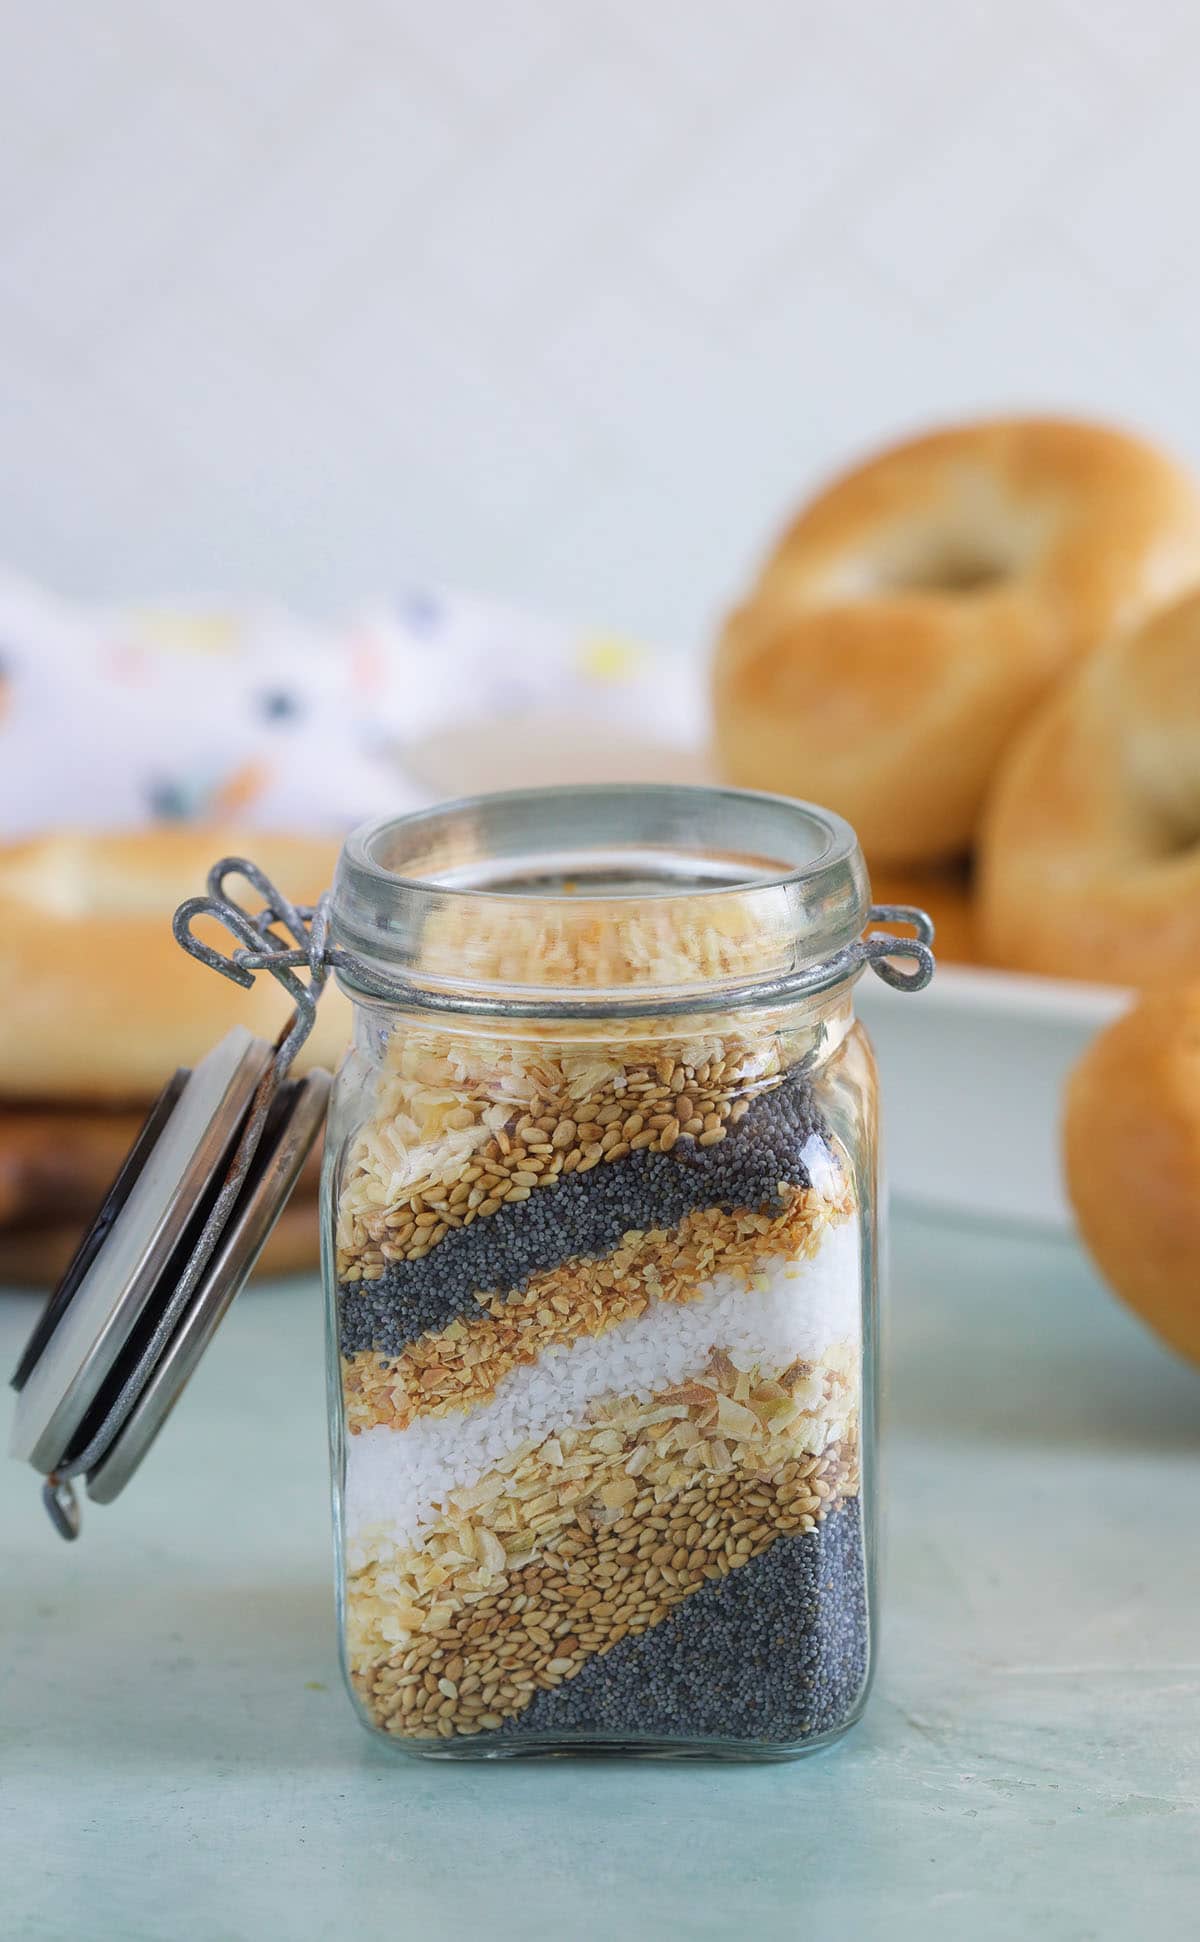 layered everything bagel seasoning ingredients in a small jar on a blue background.